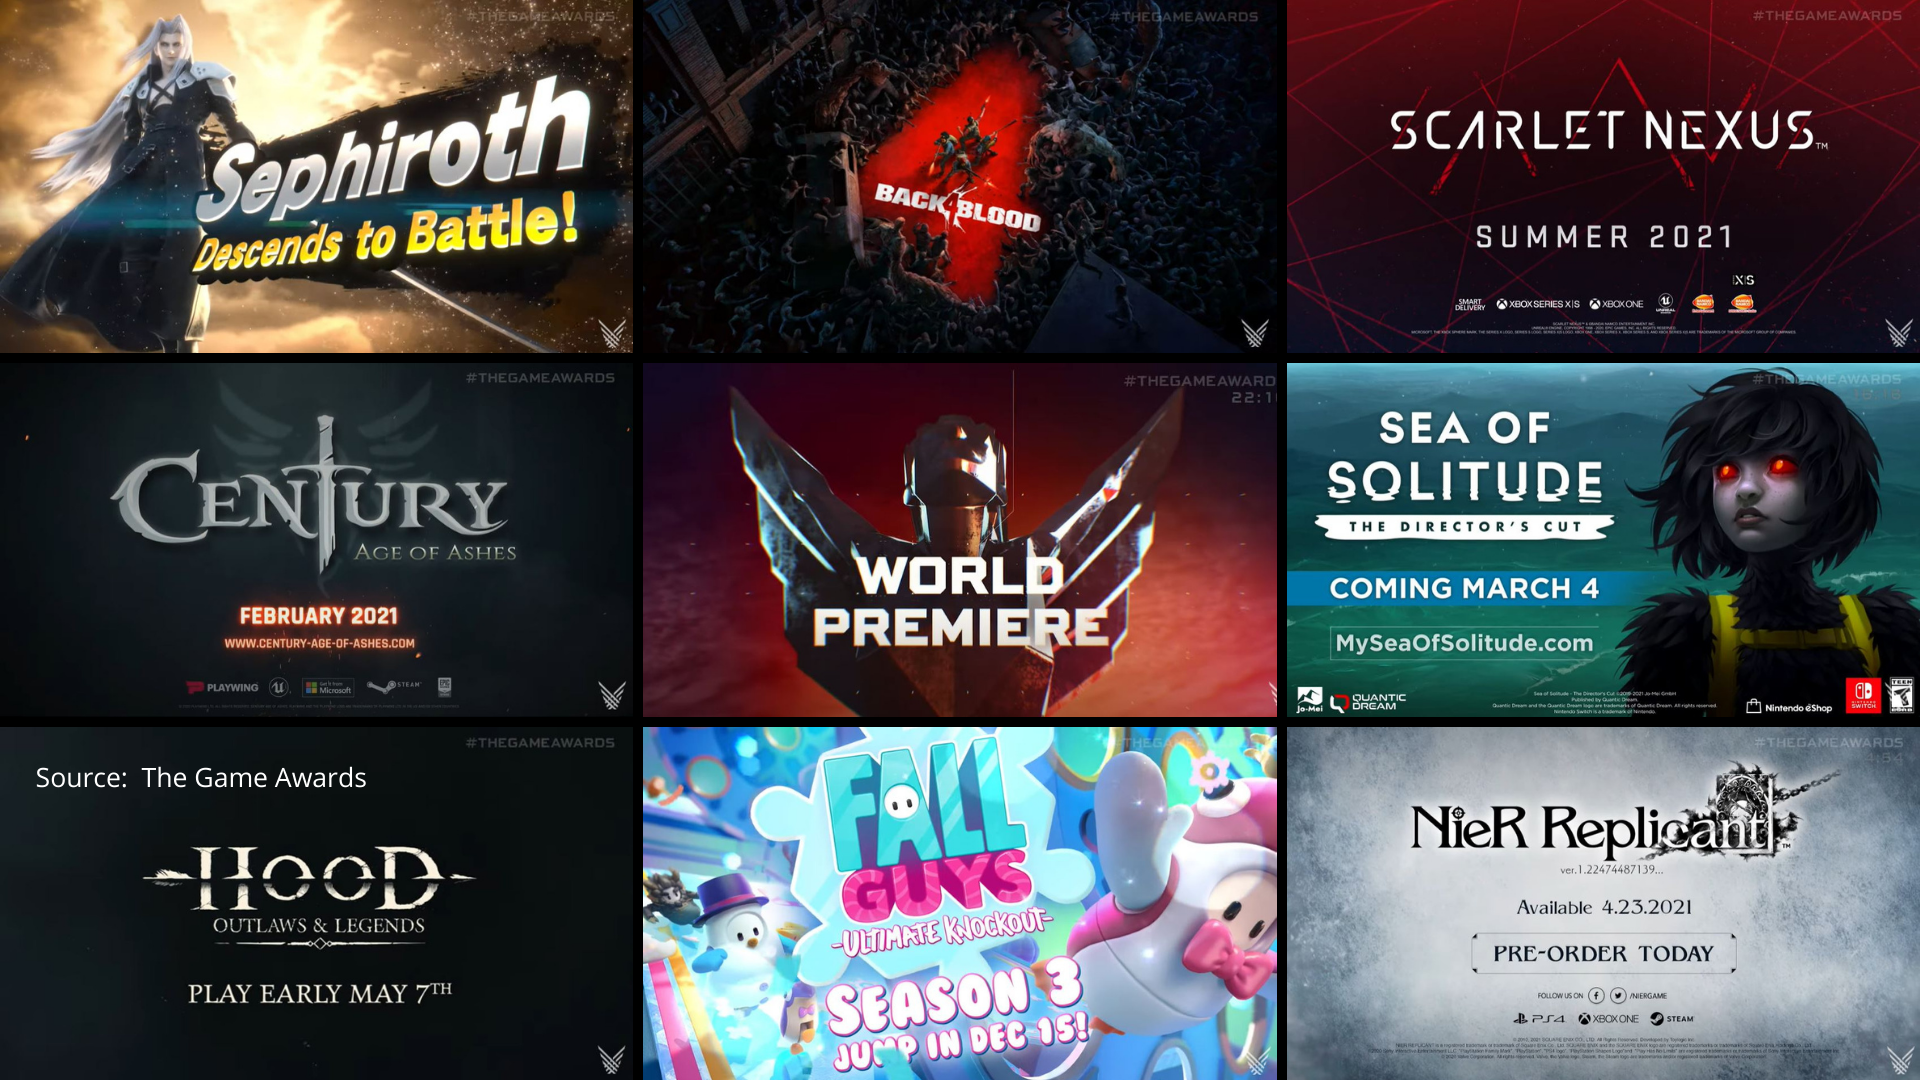 List of Upcoming Games for 2021 that Premiered on The Game Awards 2020